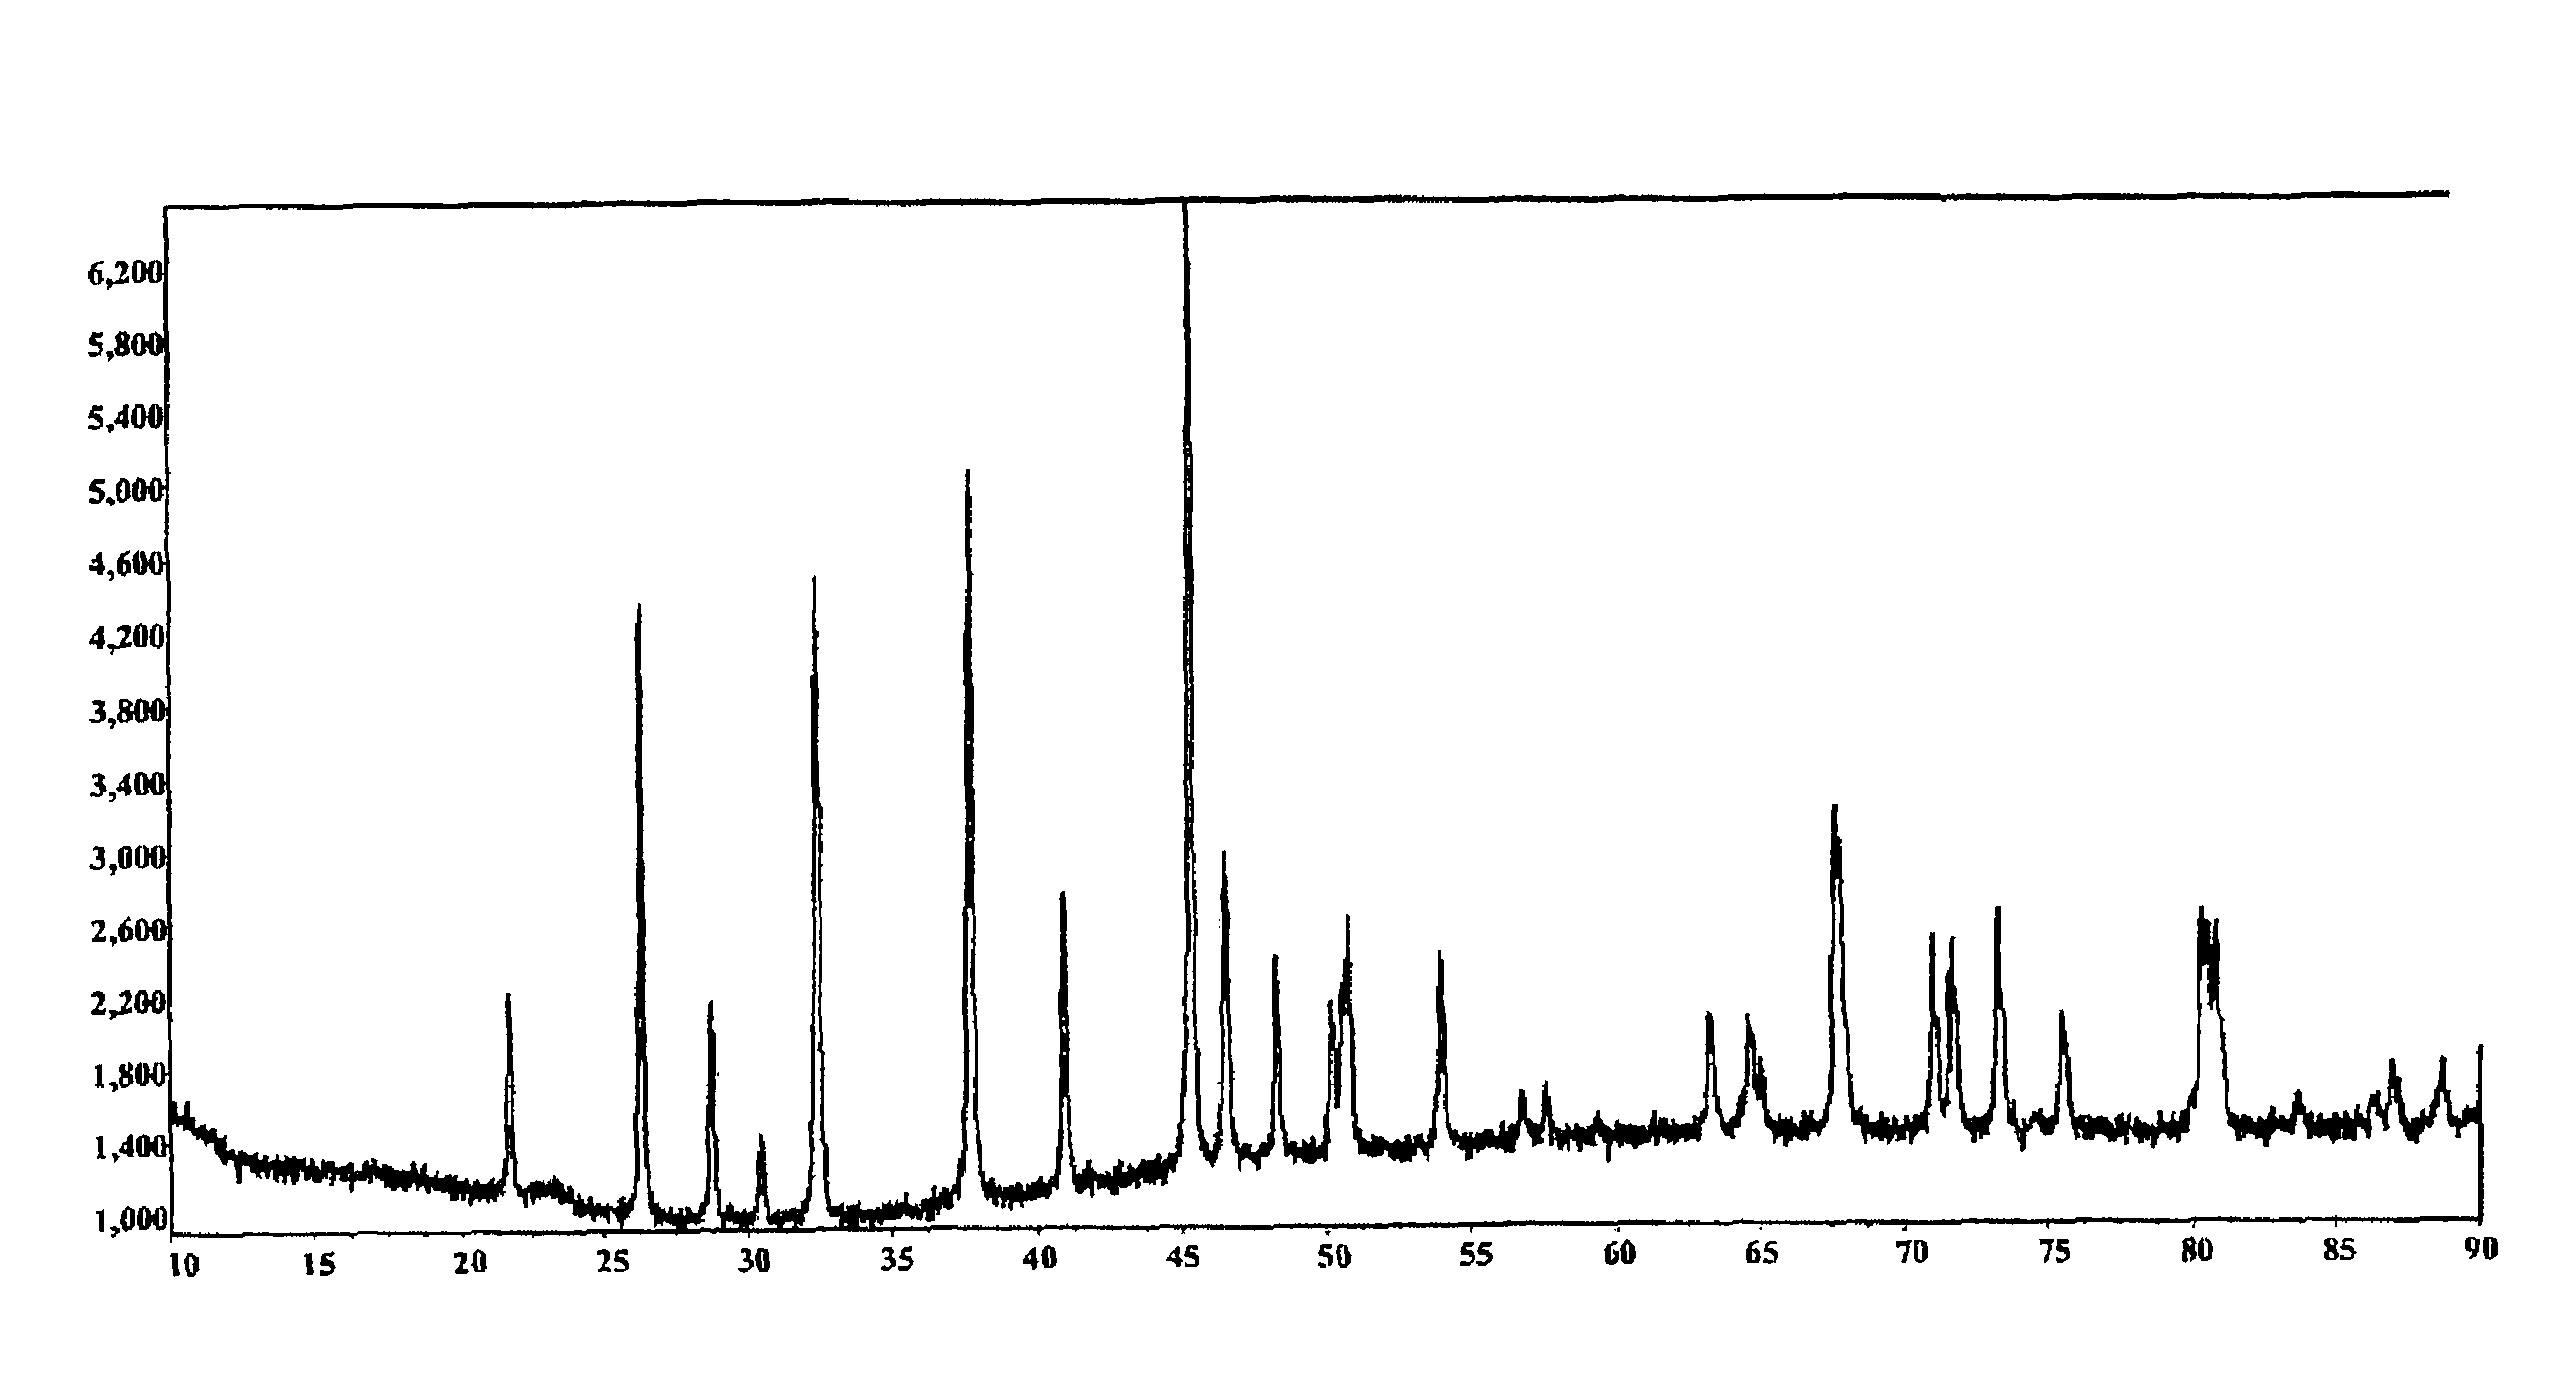 Lithium iron phosphate of olivine crystal structure and lithium secondary battery using the same